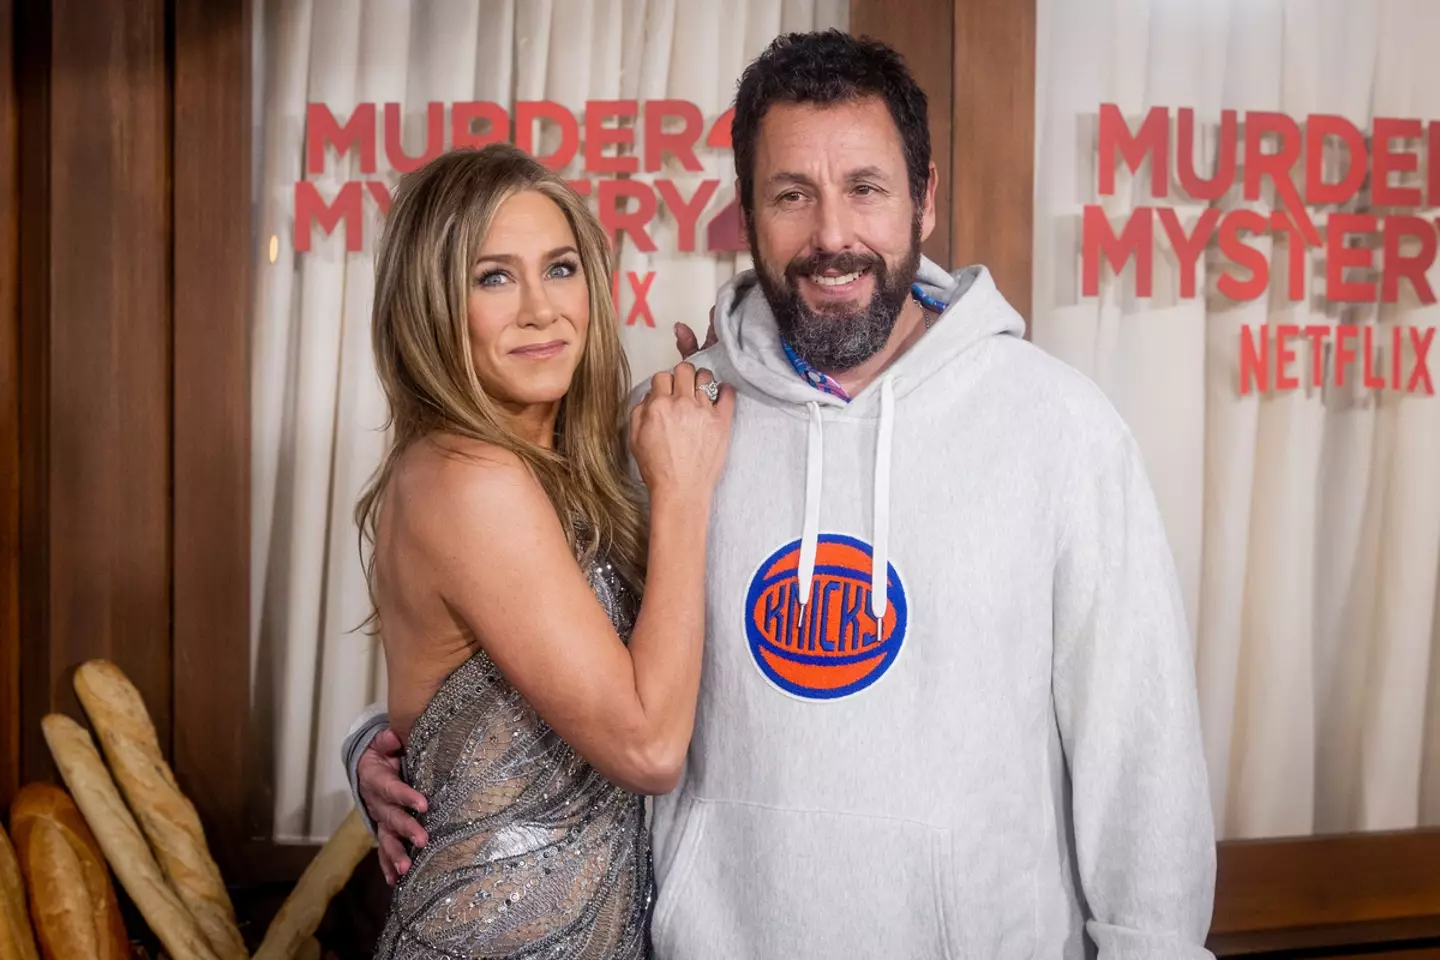 Jennifer Aniston and Adam Sandlers have been friends for years.